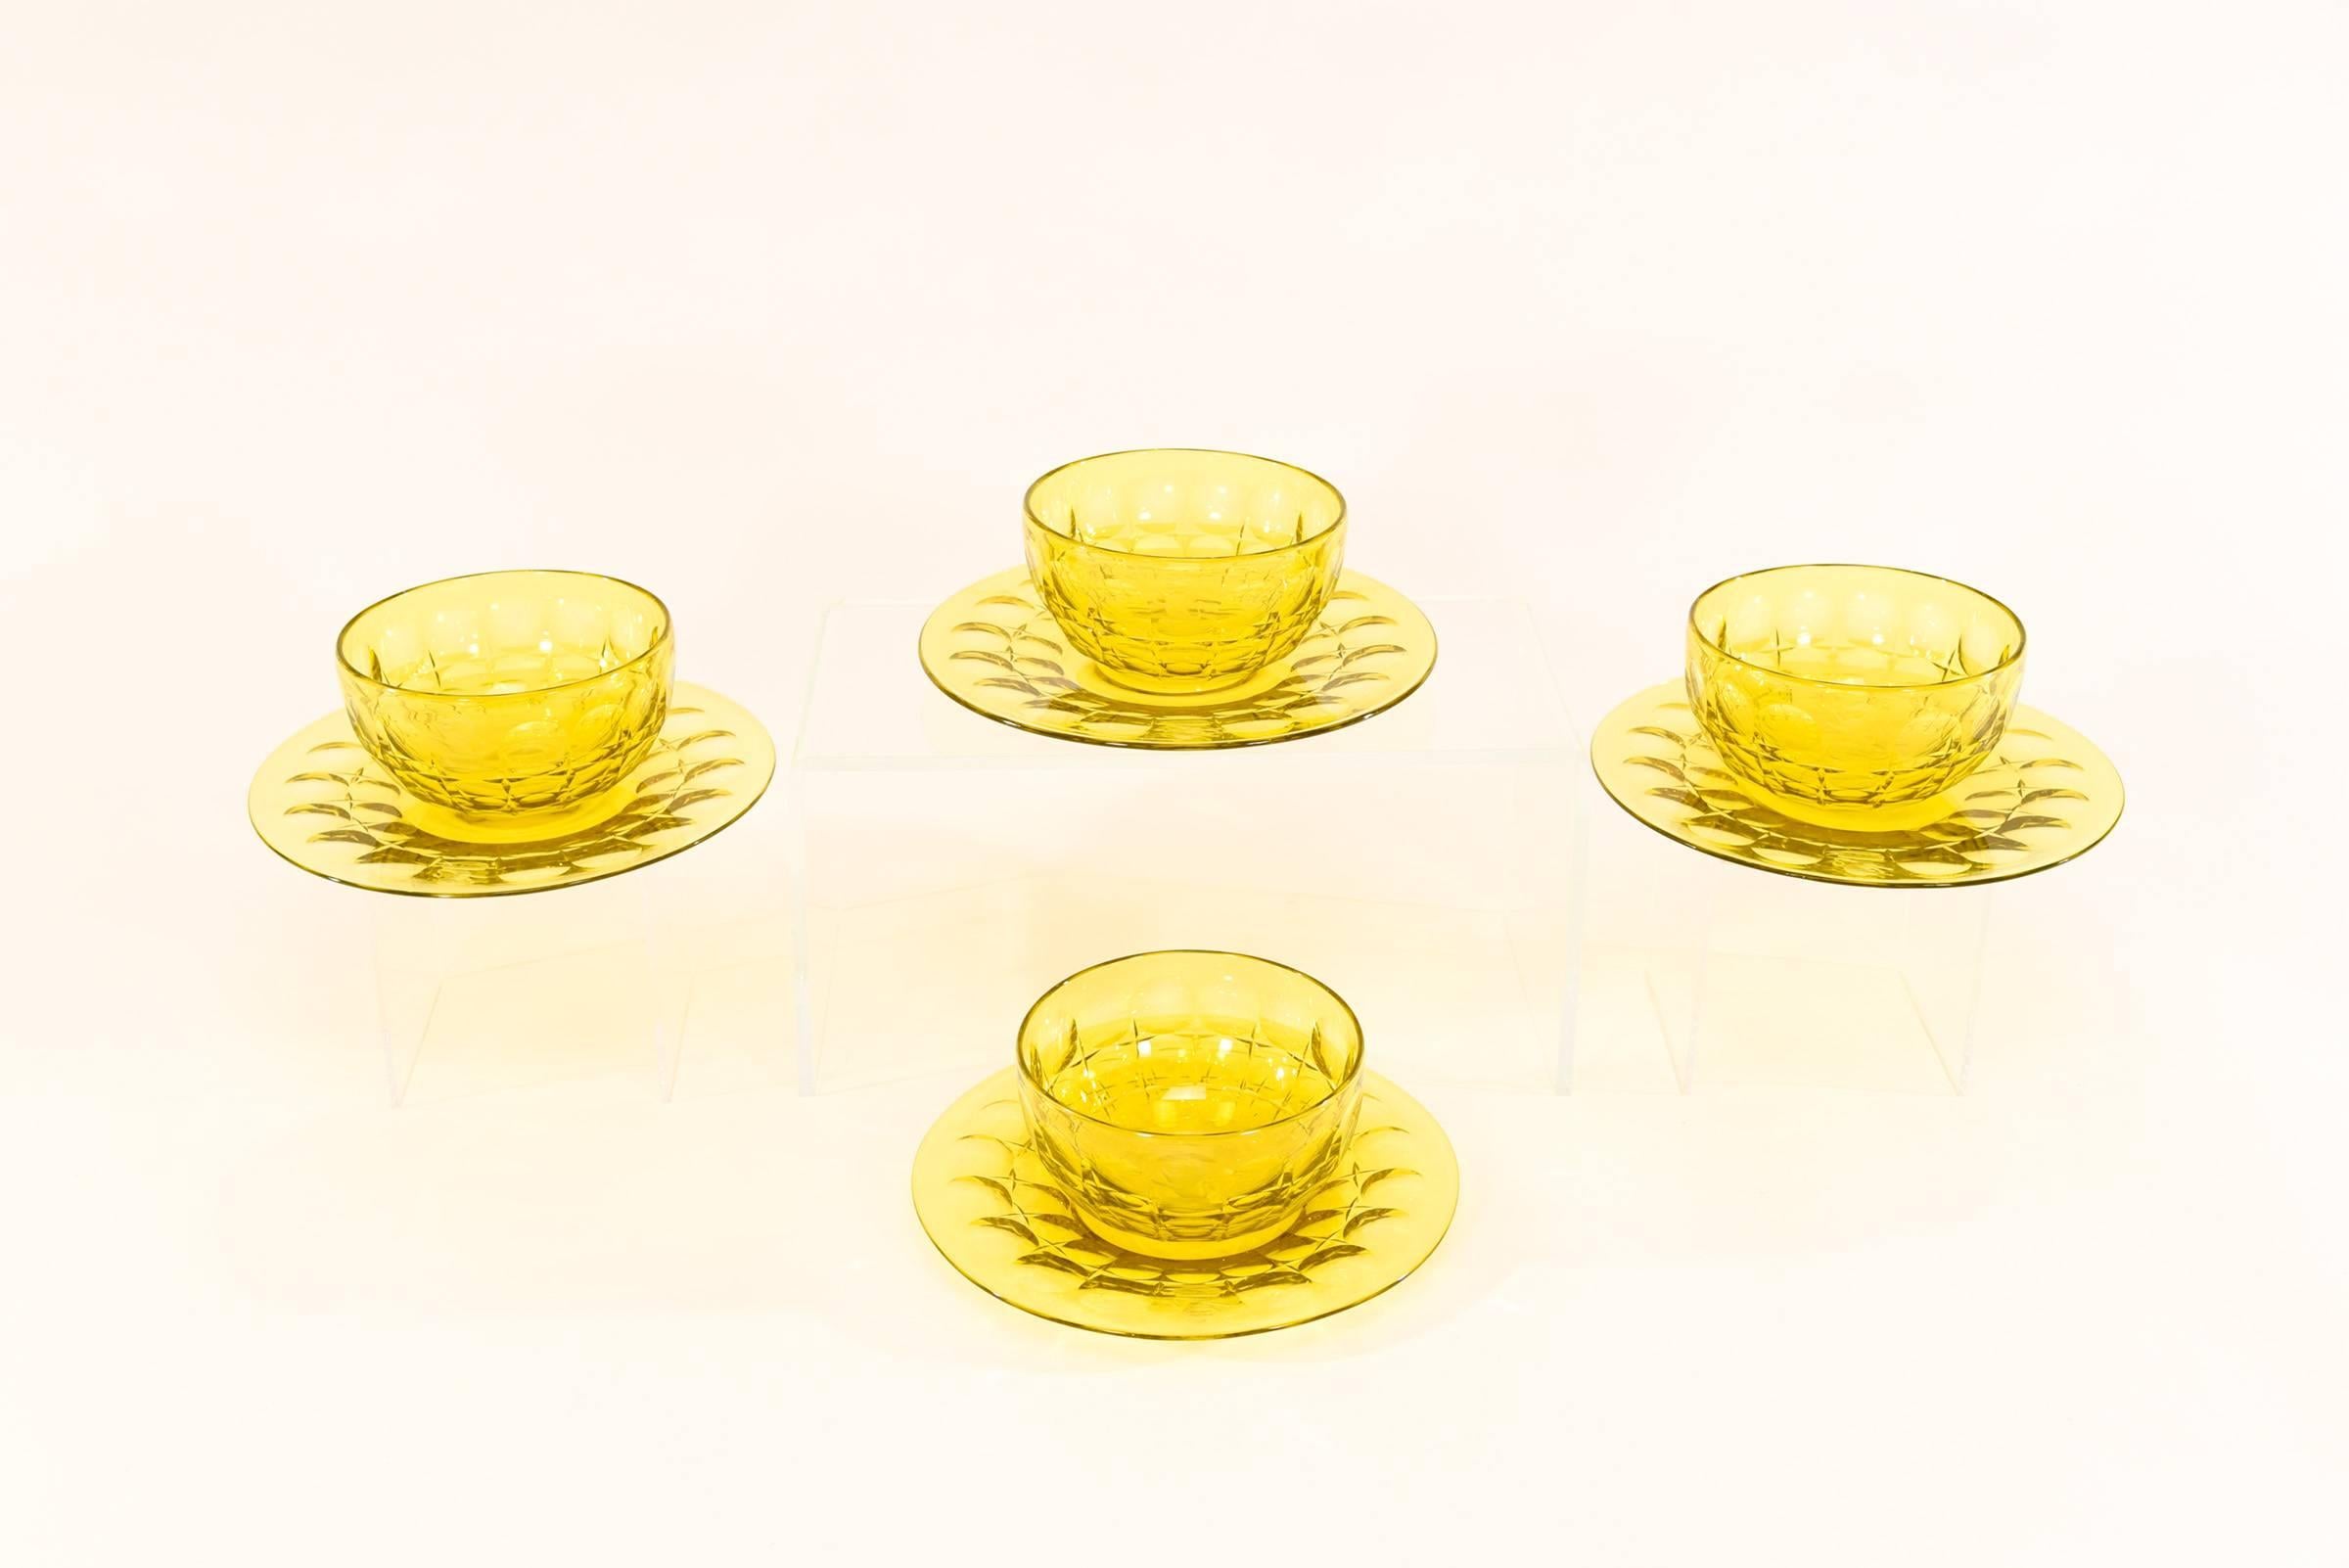 American Classical 16 Steuben Yellow Cut Crystal Dessert Bowls & Underplates w/ Armorial Crest For Sale